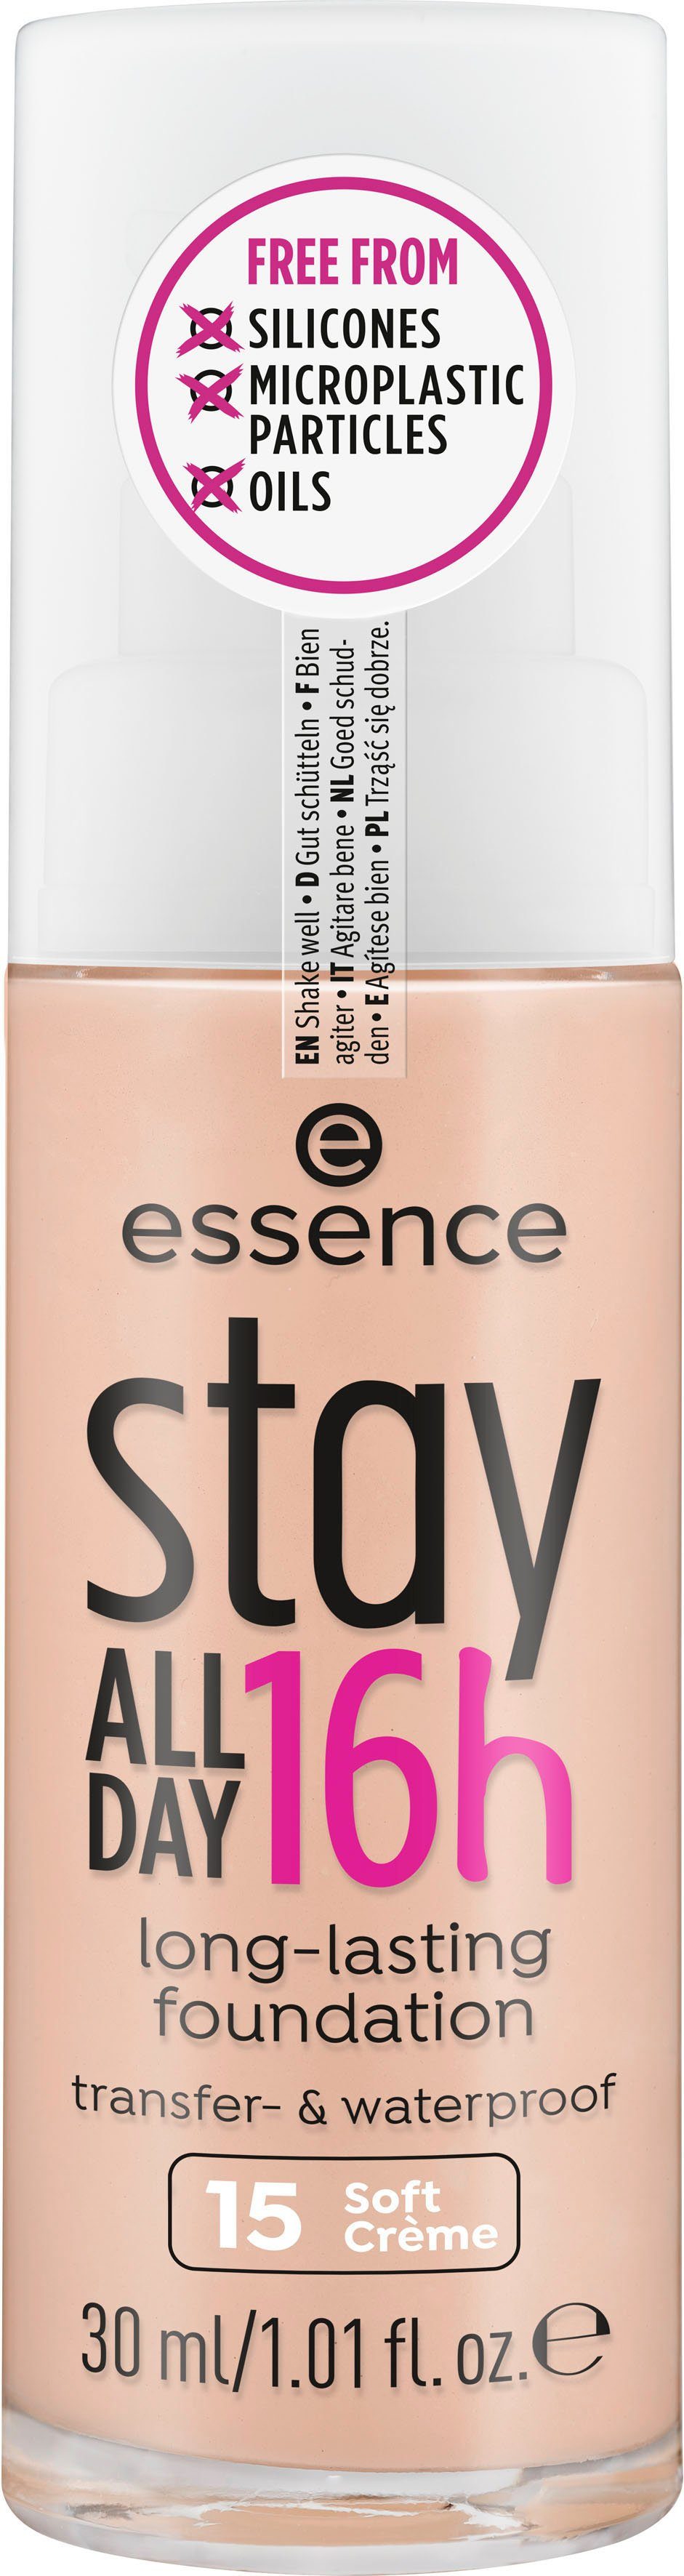 Foundation DAY Essence 3-tlg. long-lasting, stay ALL Soft 16h Creme